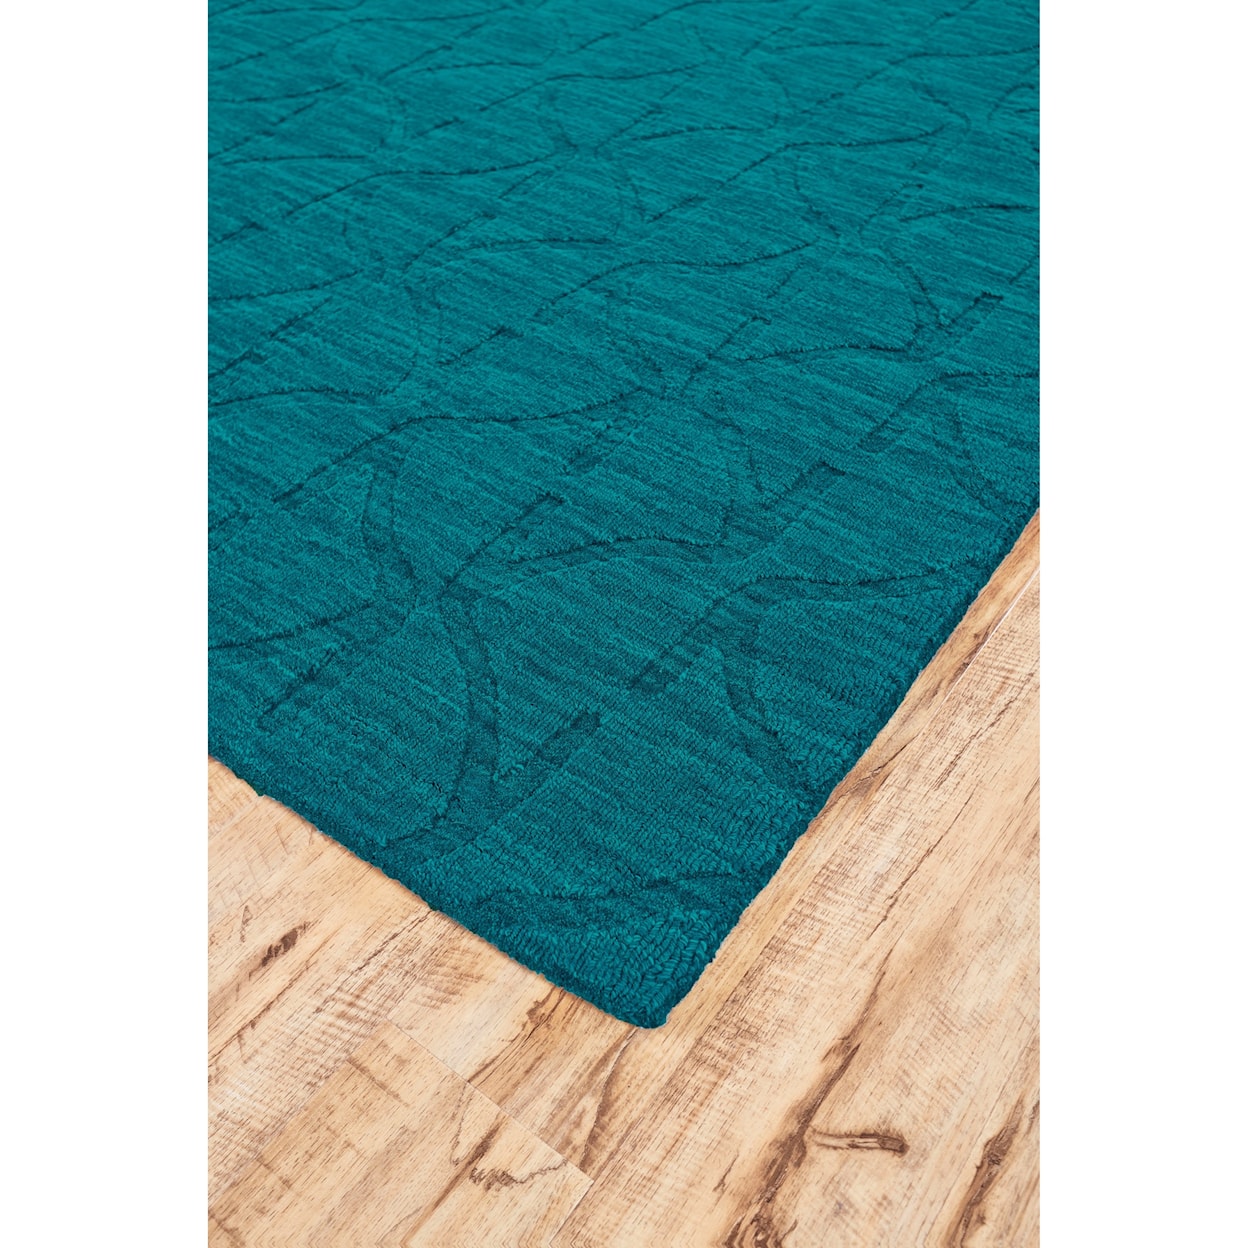 Feizy Rugs Soma Teal 5' x 8' Area Rug